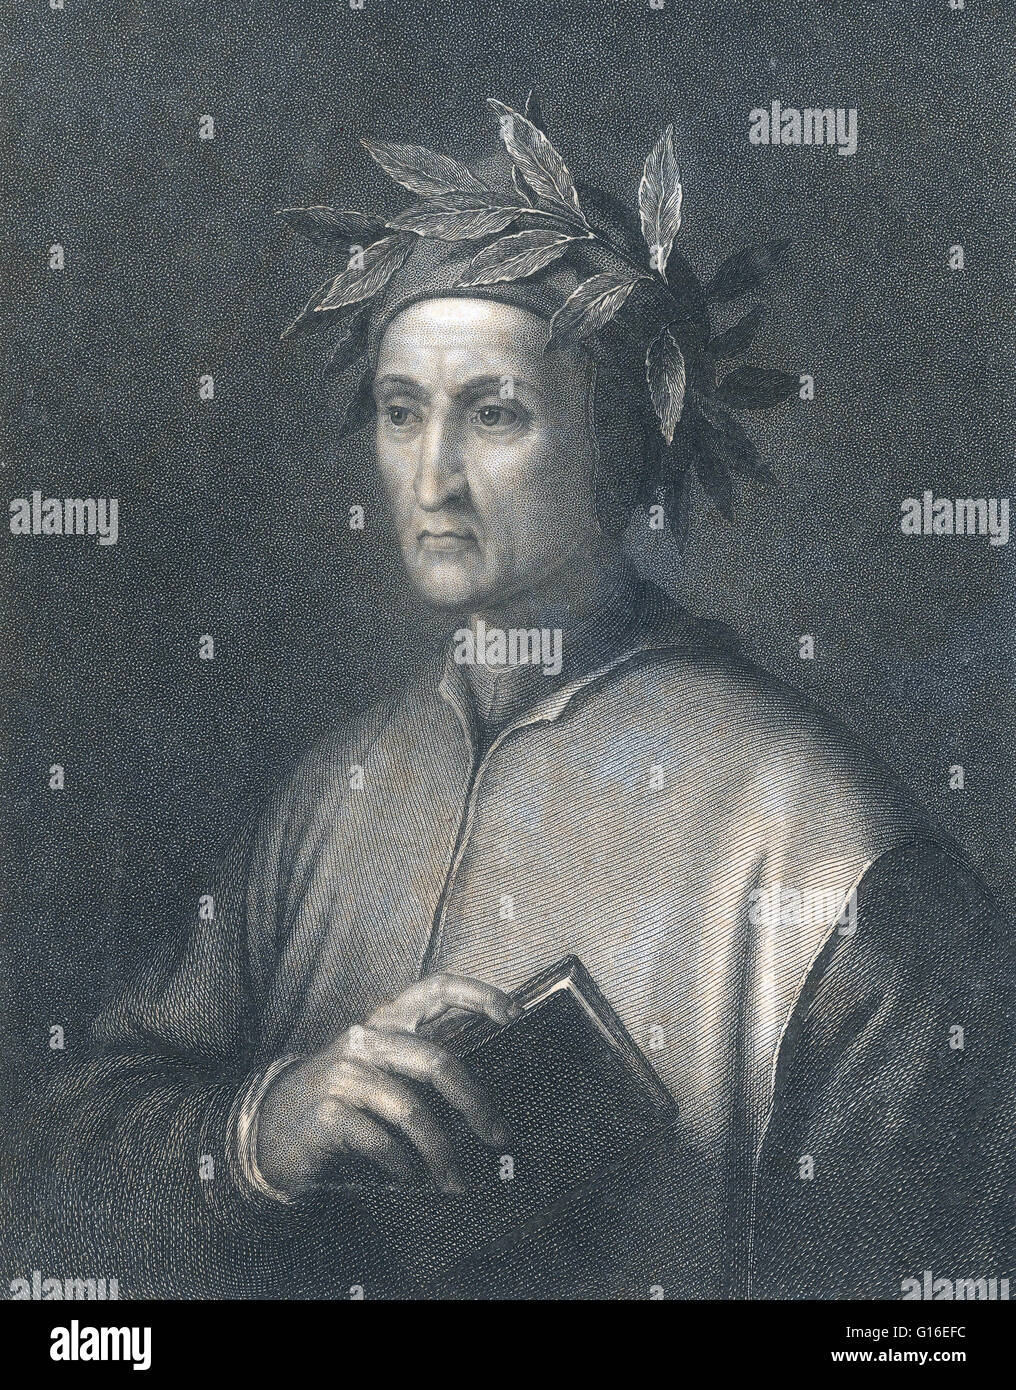 Durante degli Alighieri (1265 - 1321) was an Italian poet and moral philosopher best known for the epic poem The Divine Comedy, which comprises sections representing the three tiers of the Christian afterlife: purgatory, heaven, and hell. This poem, a gre Stock Photo